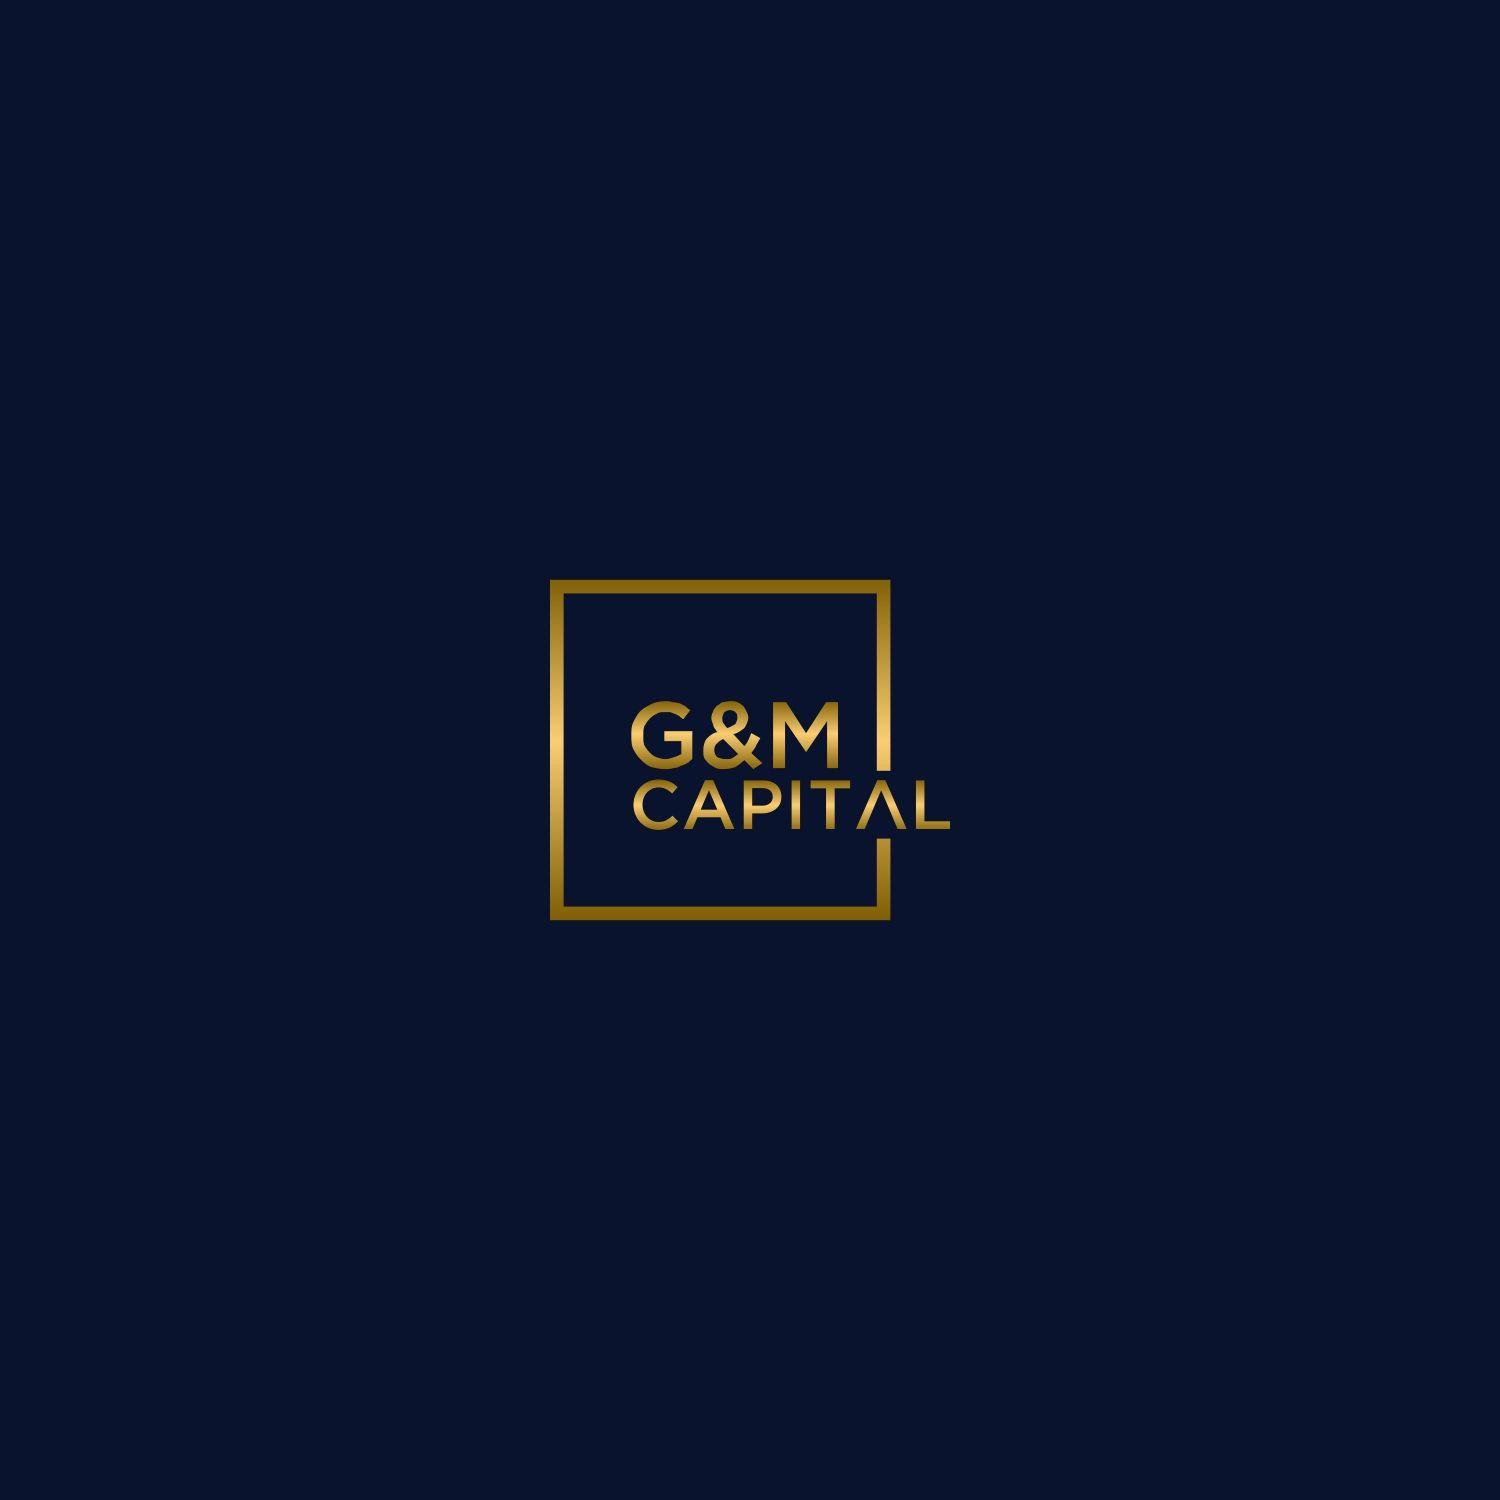 Blue and Yellow Capital M Logo - Investment Logo Design For G&M Capital By Hi Tech Solution. Design